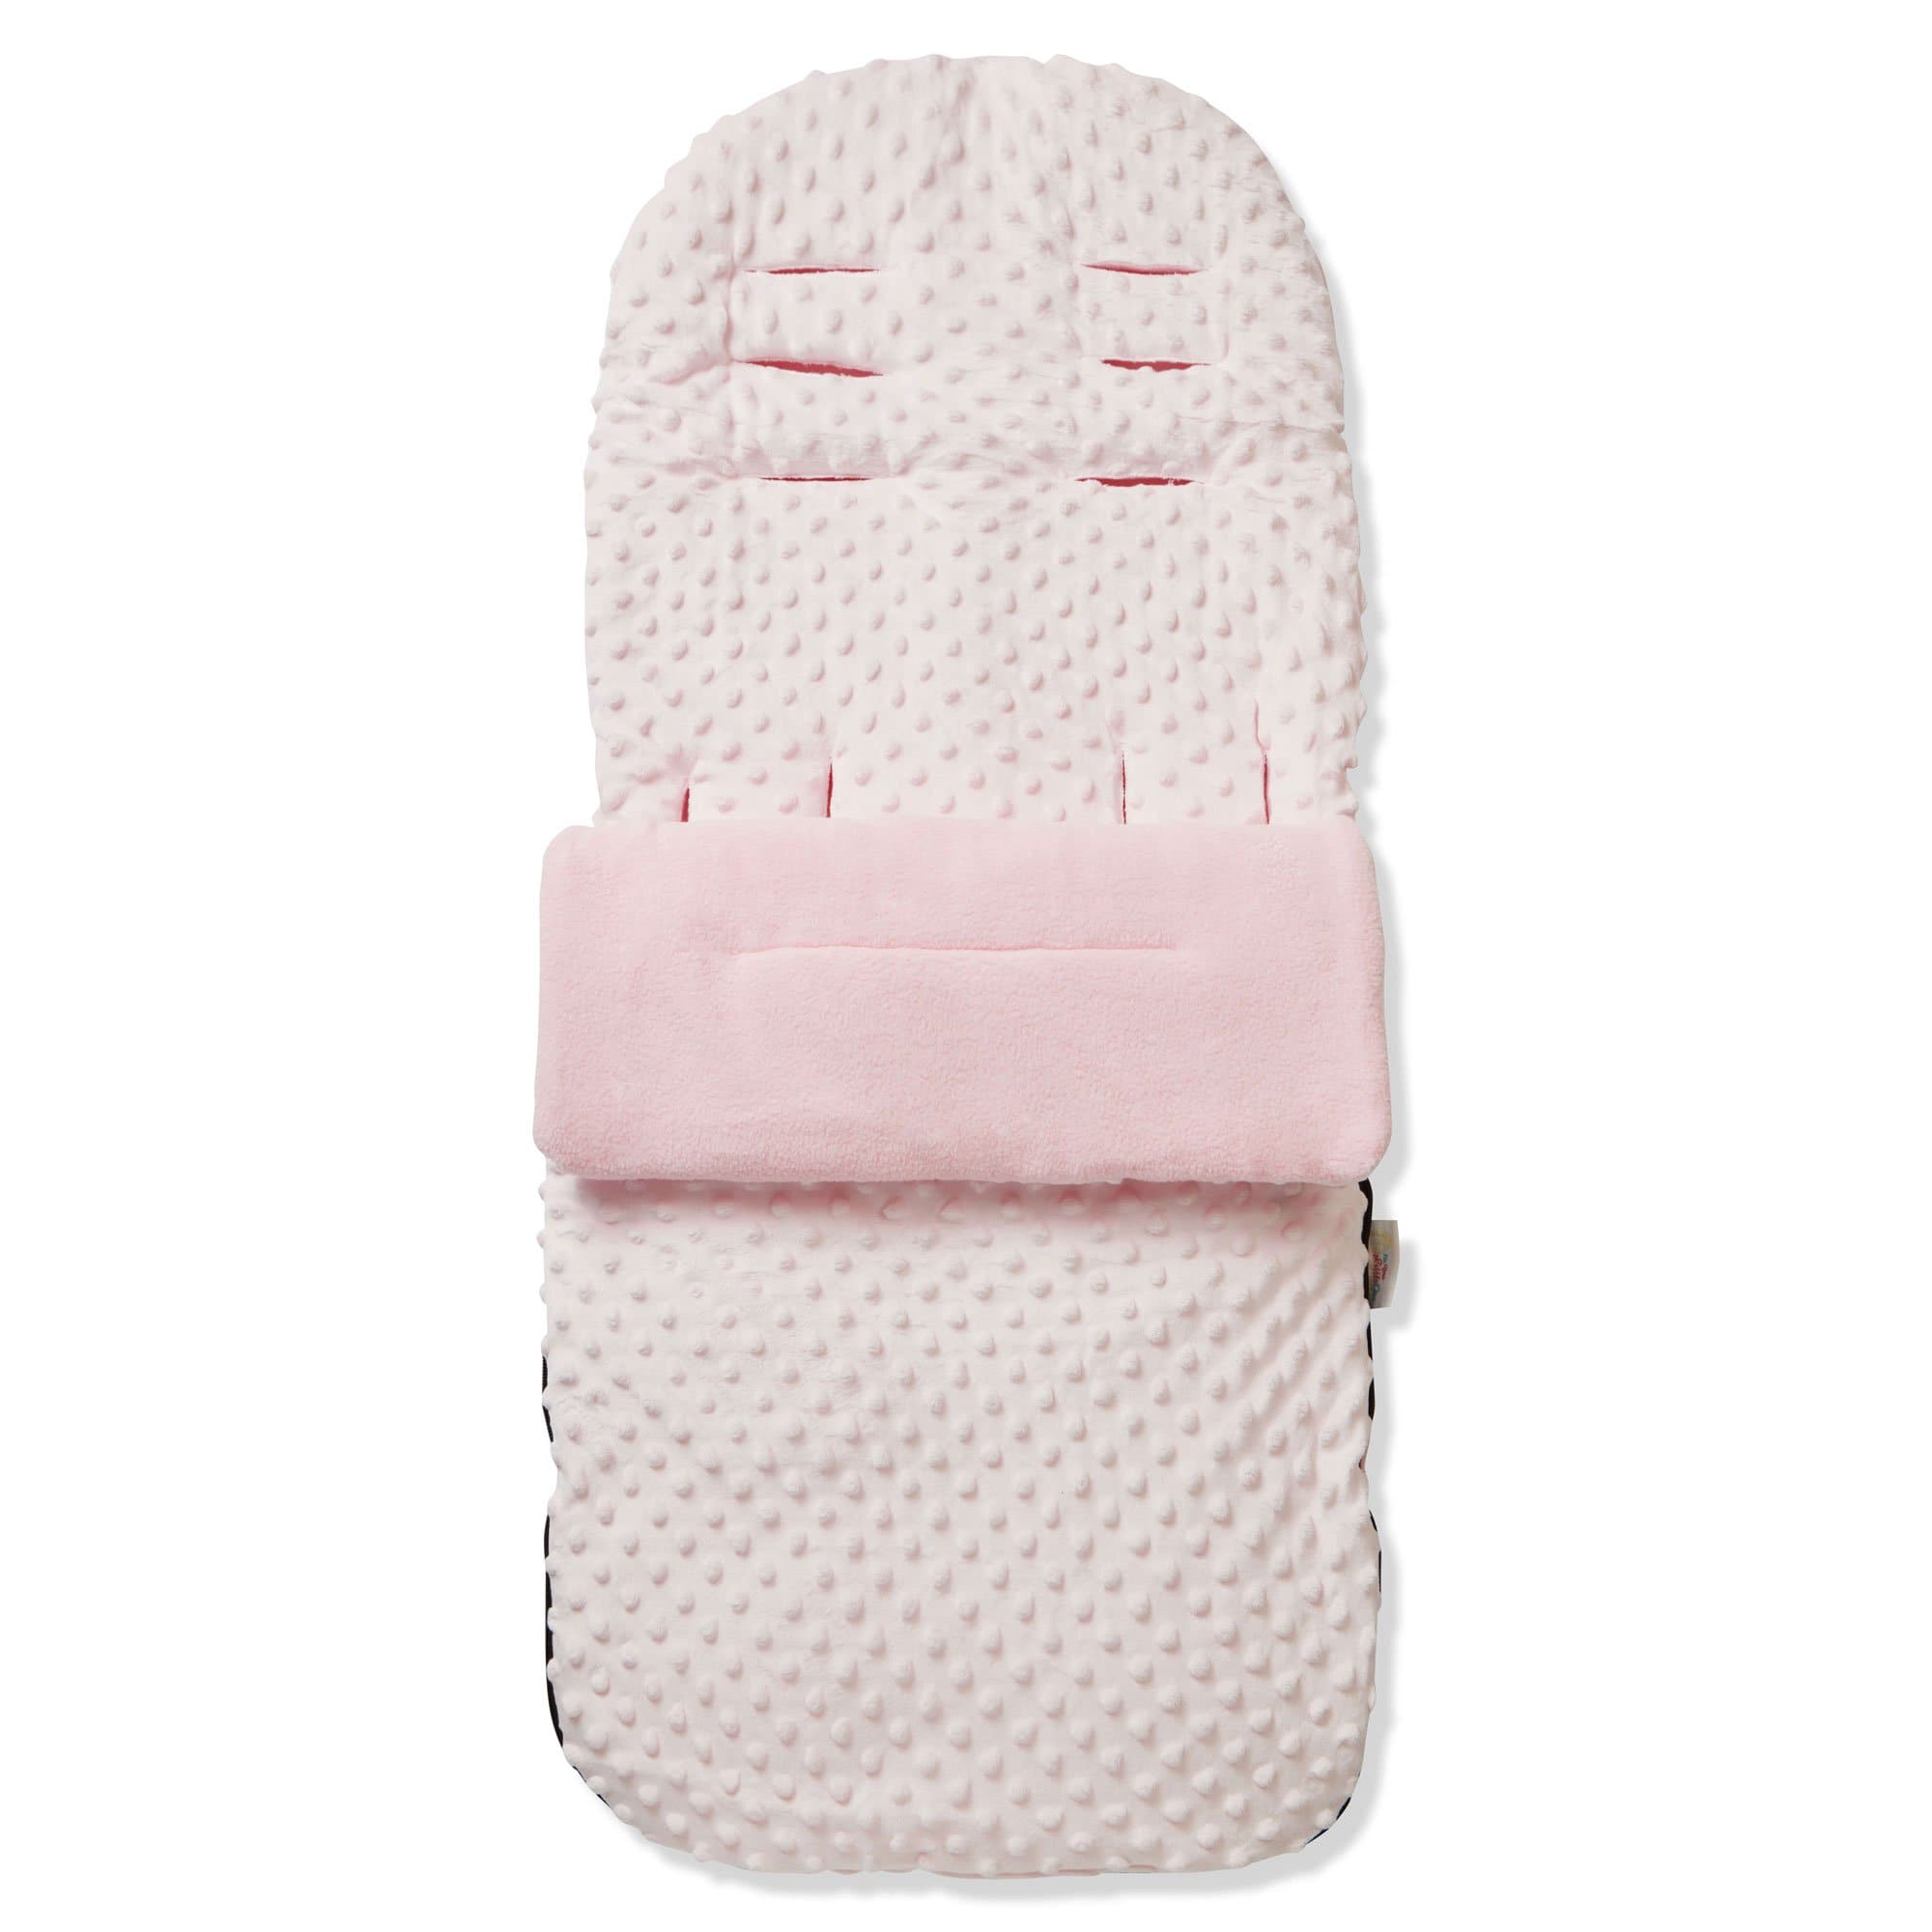 Dimple Footmuff / Cosy Toes Compatible with Concord - Pink / Fits All Models | For Your Little One